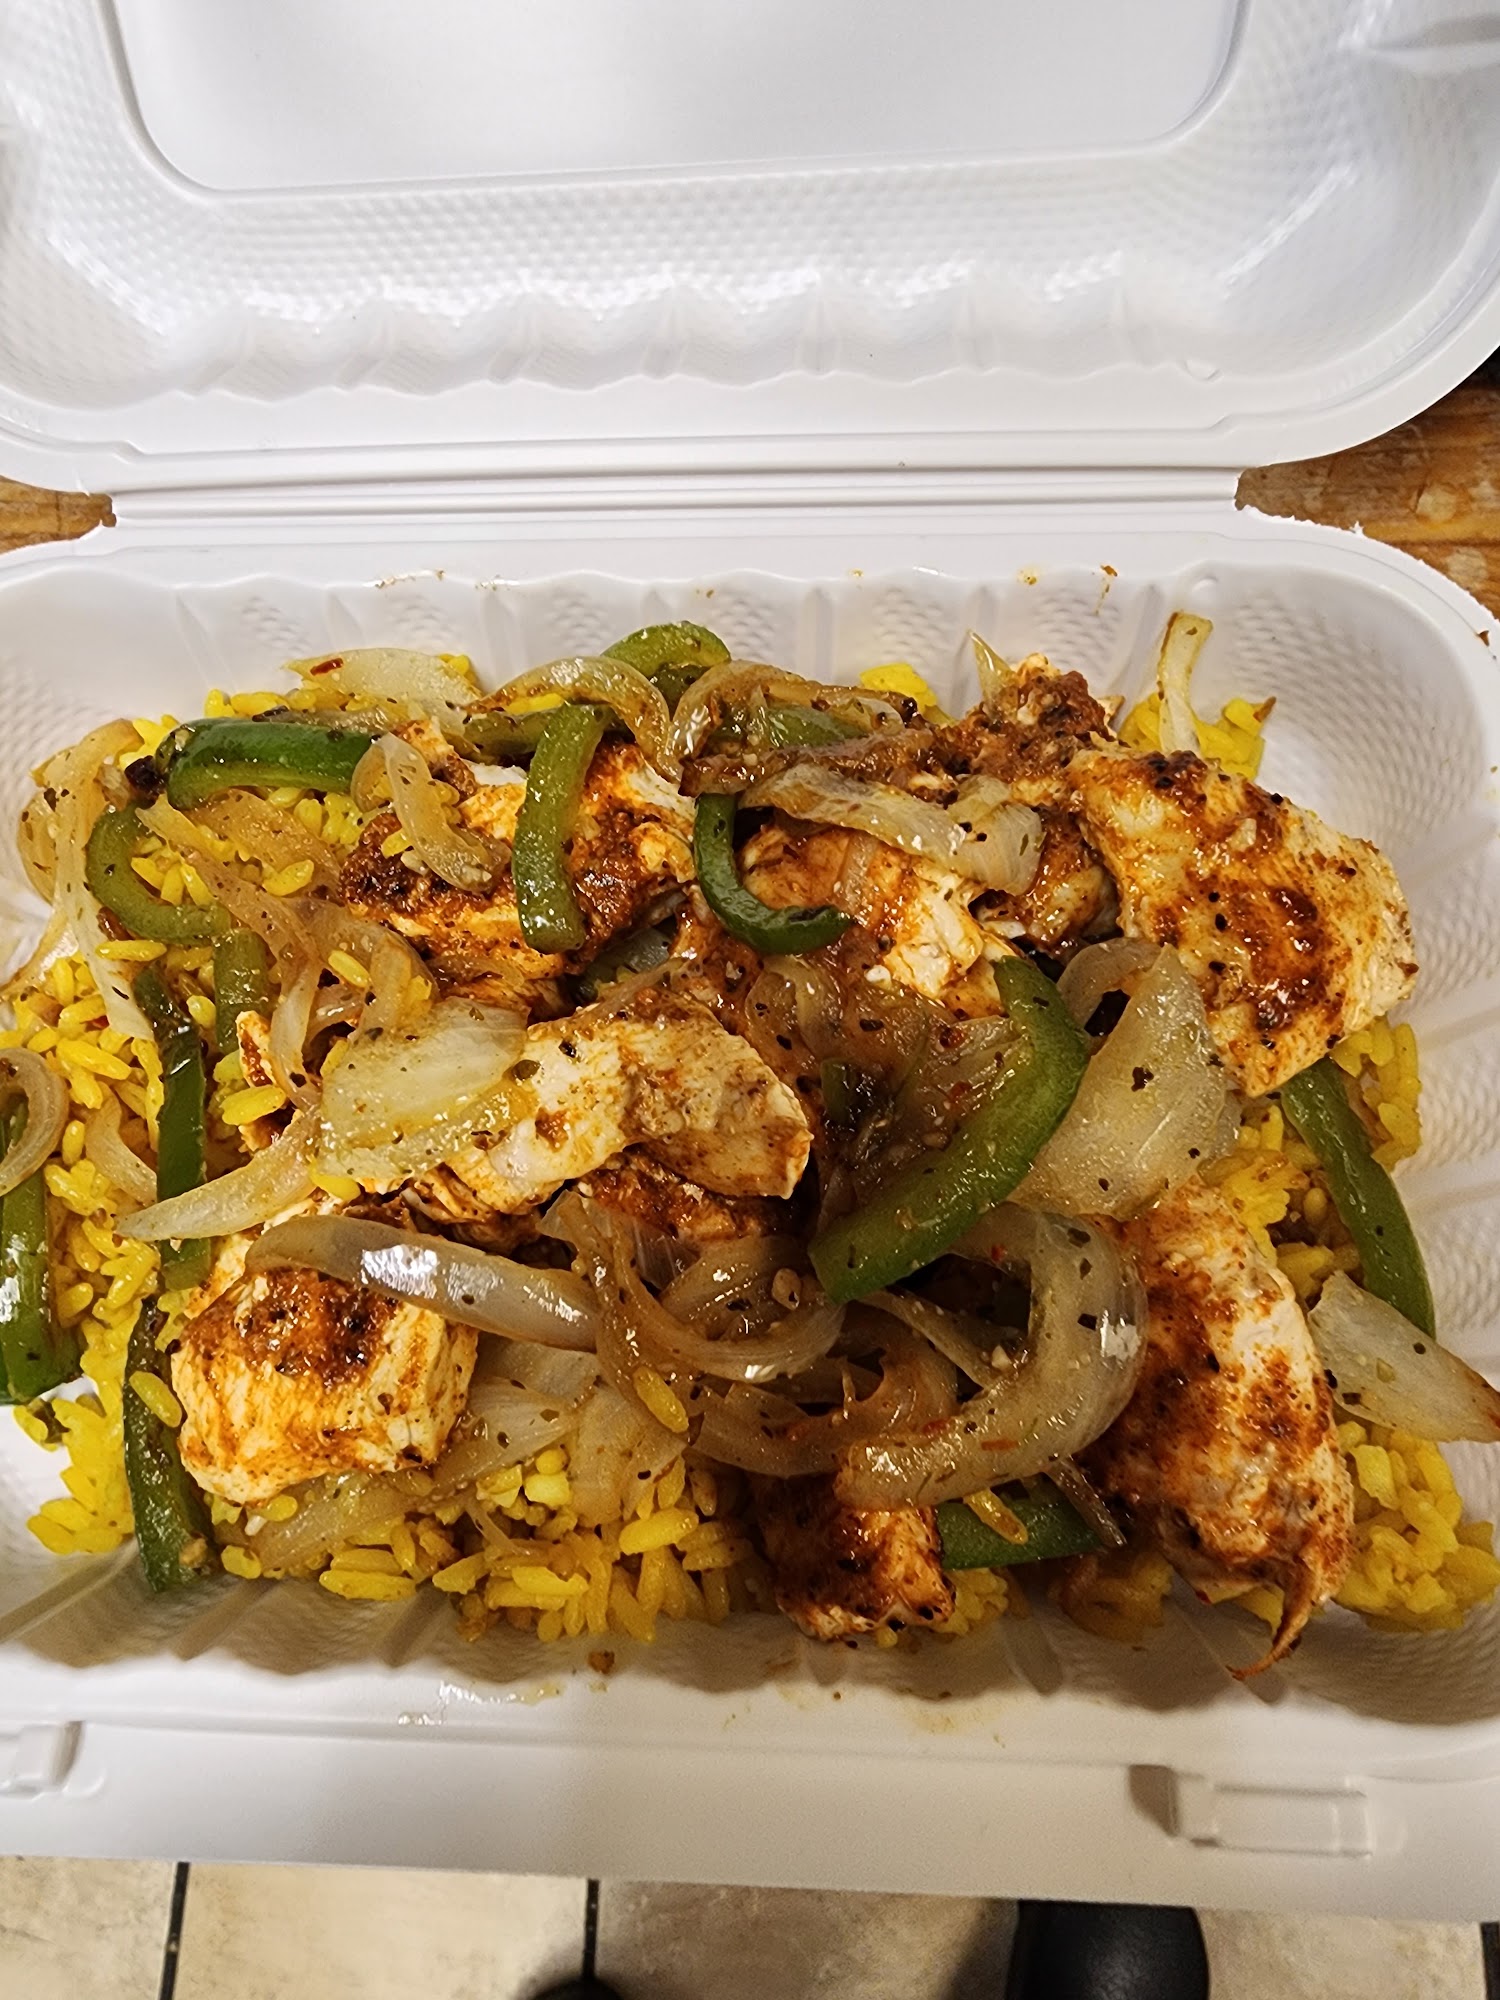 Halal Food 4202 Park Heights Ave, Baltimore, MD 21215